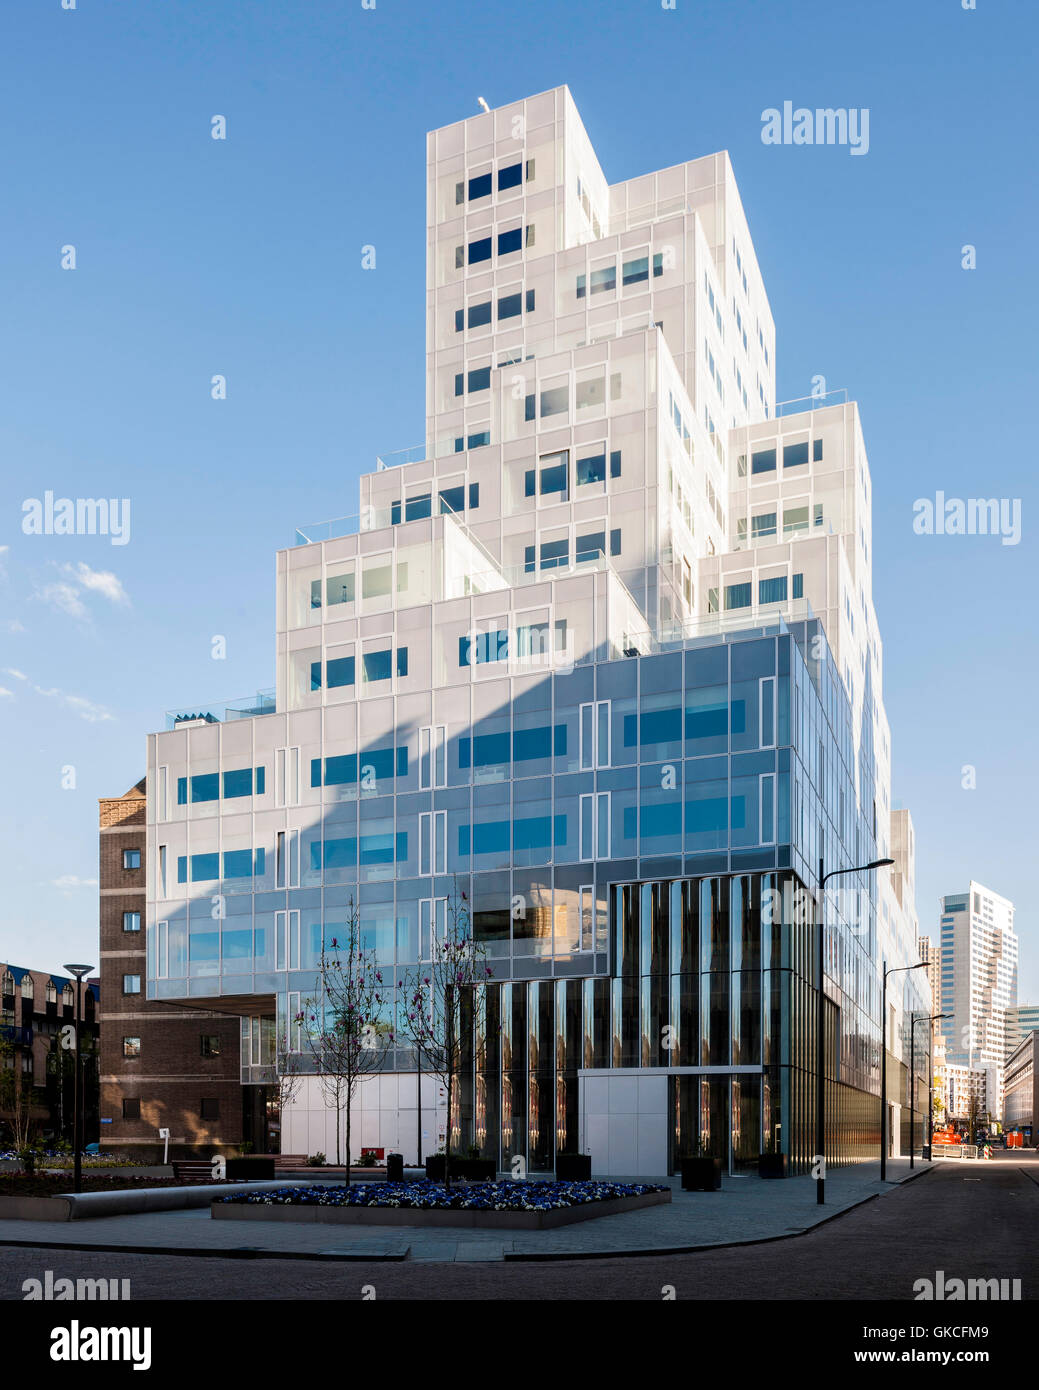 Exterior view of rear elevation. Timmerhuis, Rotterdam, Netherlands. Architect: OMA Rem Koolhaas, 2015. Stock Photo